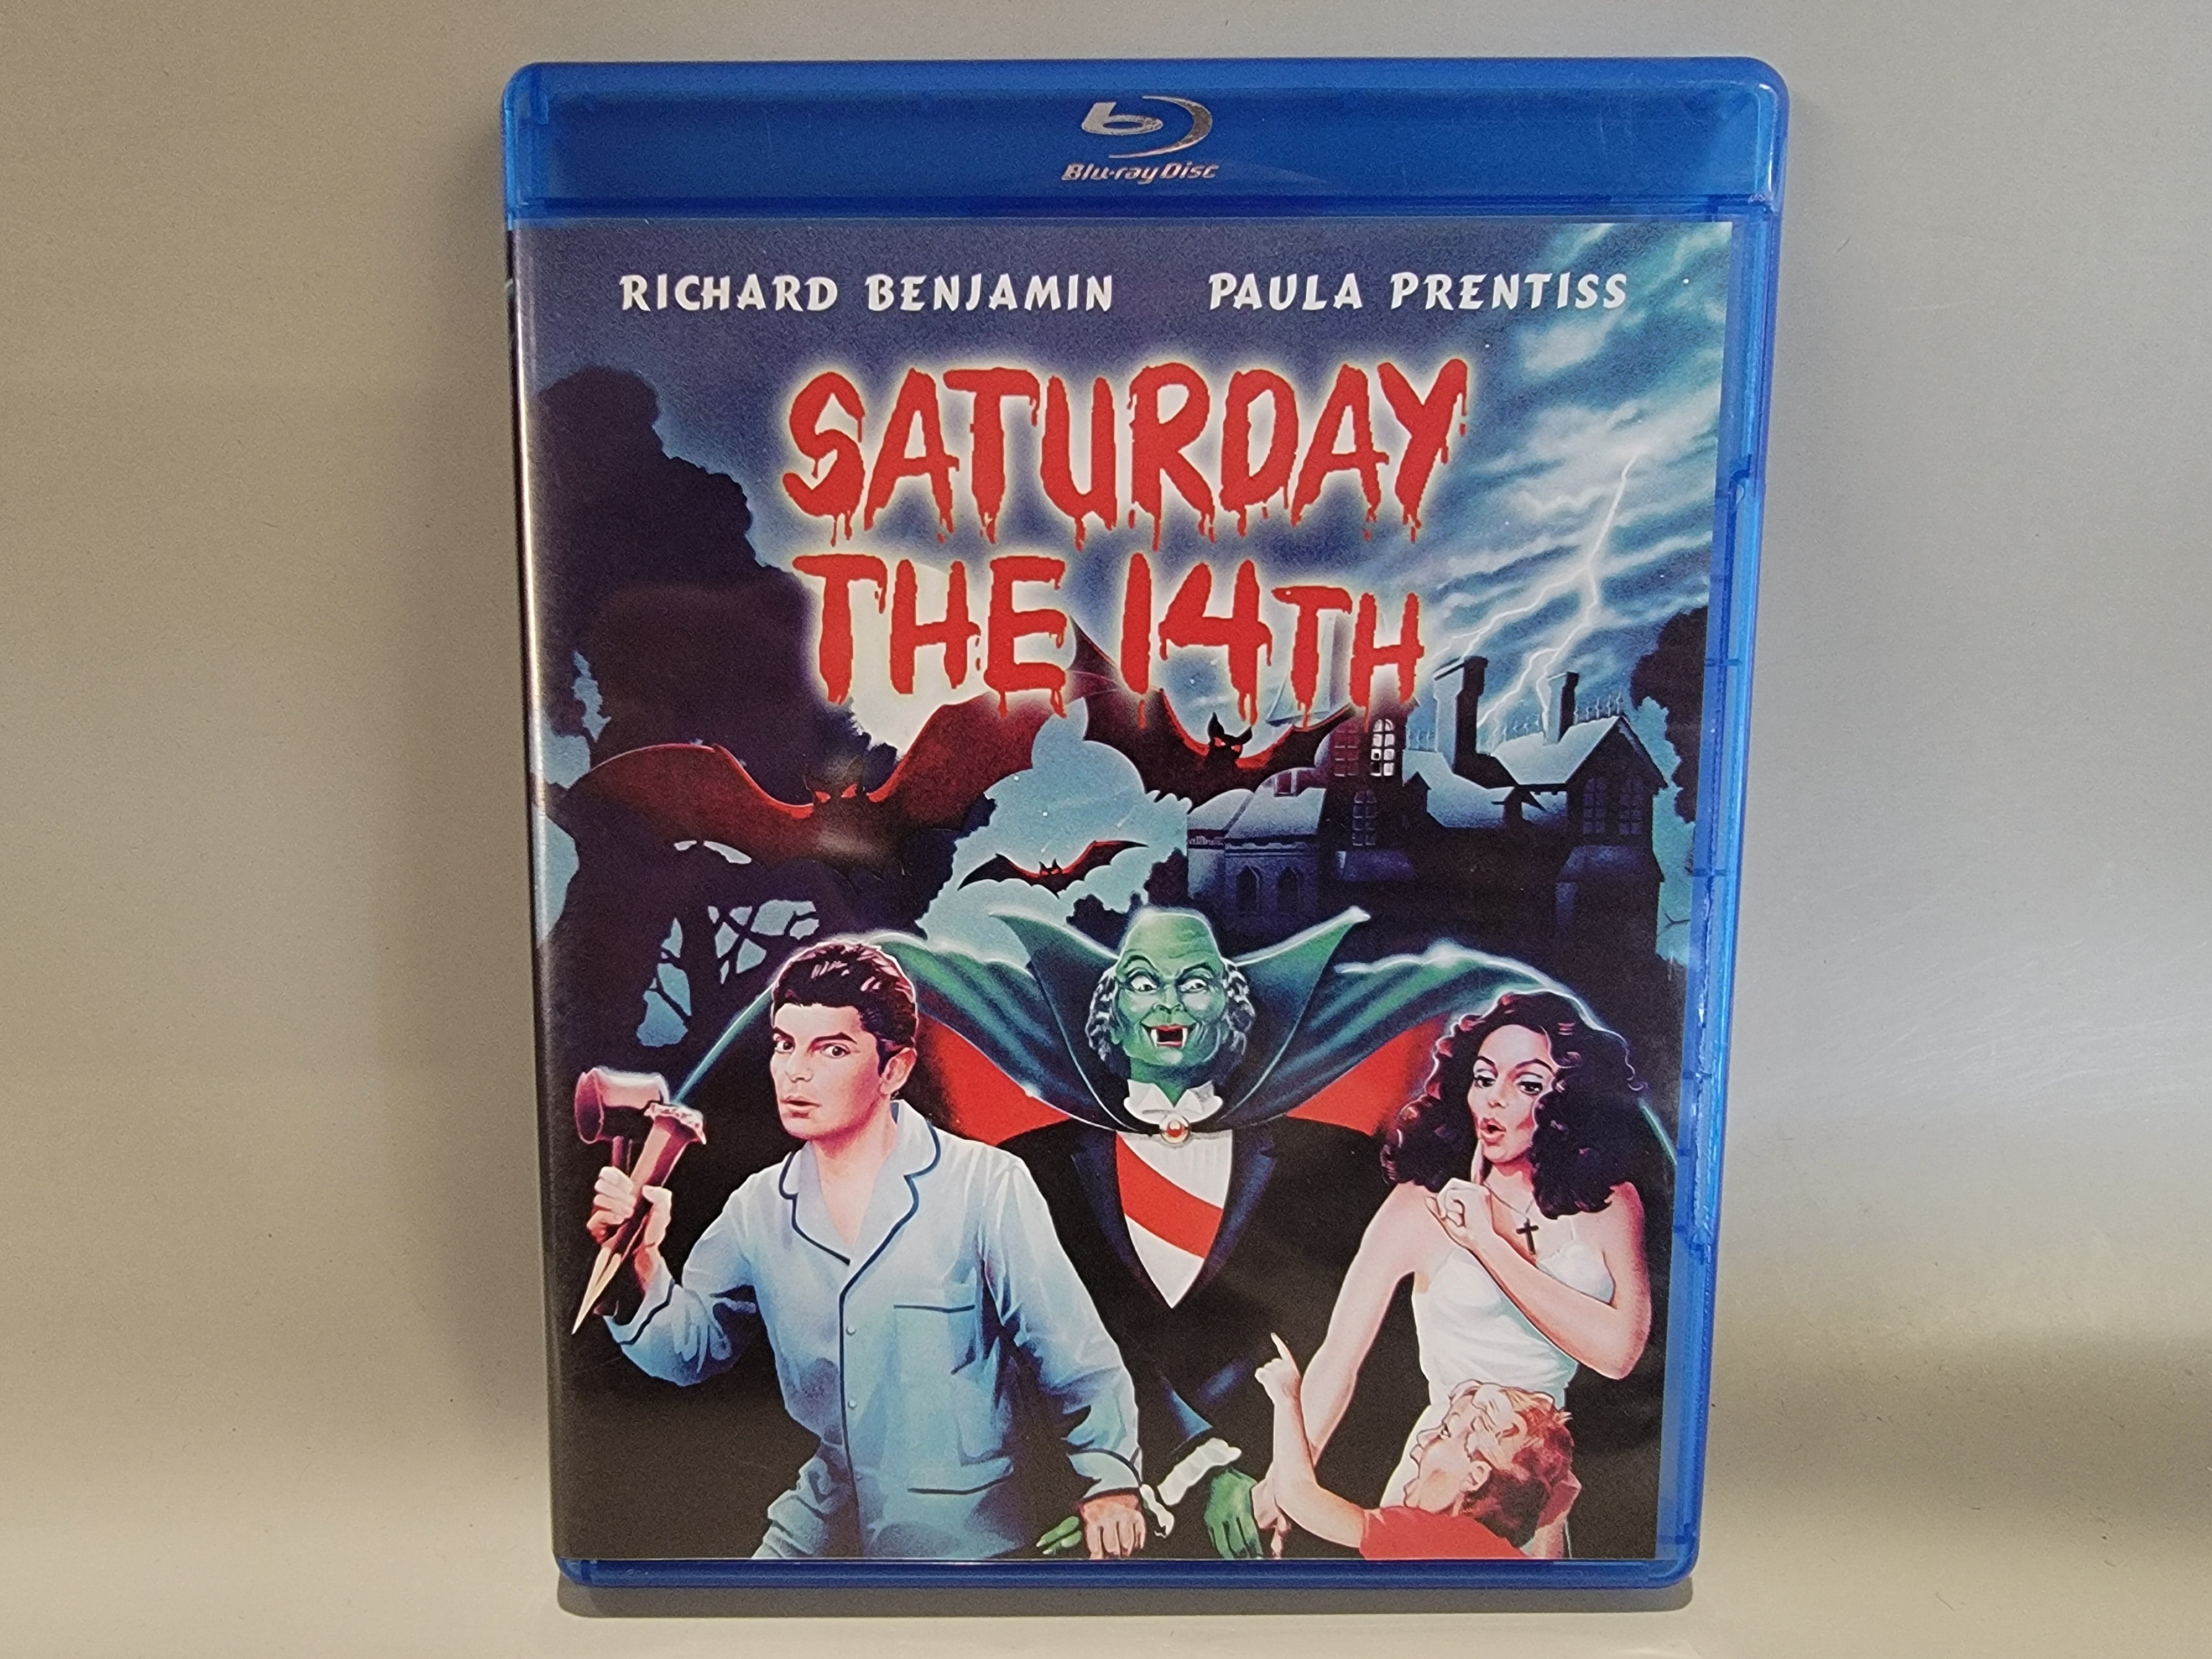 SATURDAY THE 14TH BLU-RAY [USED]